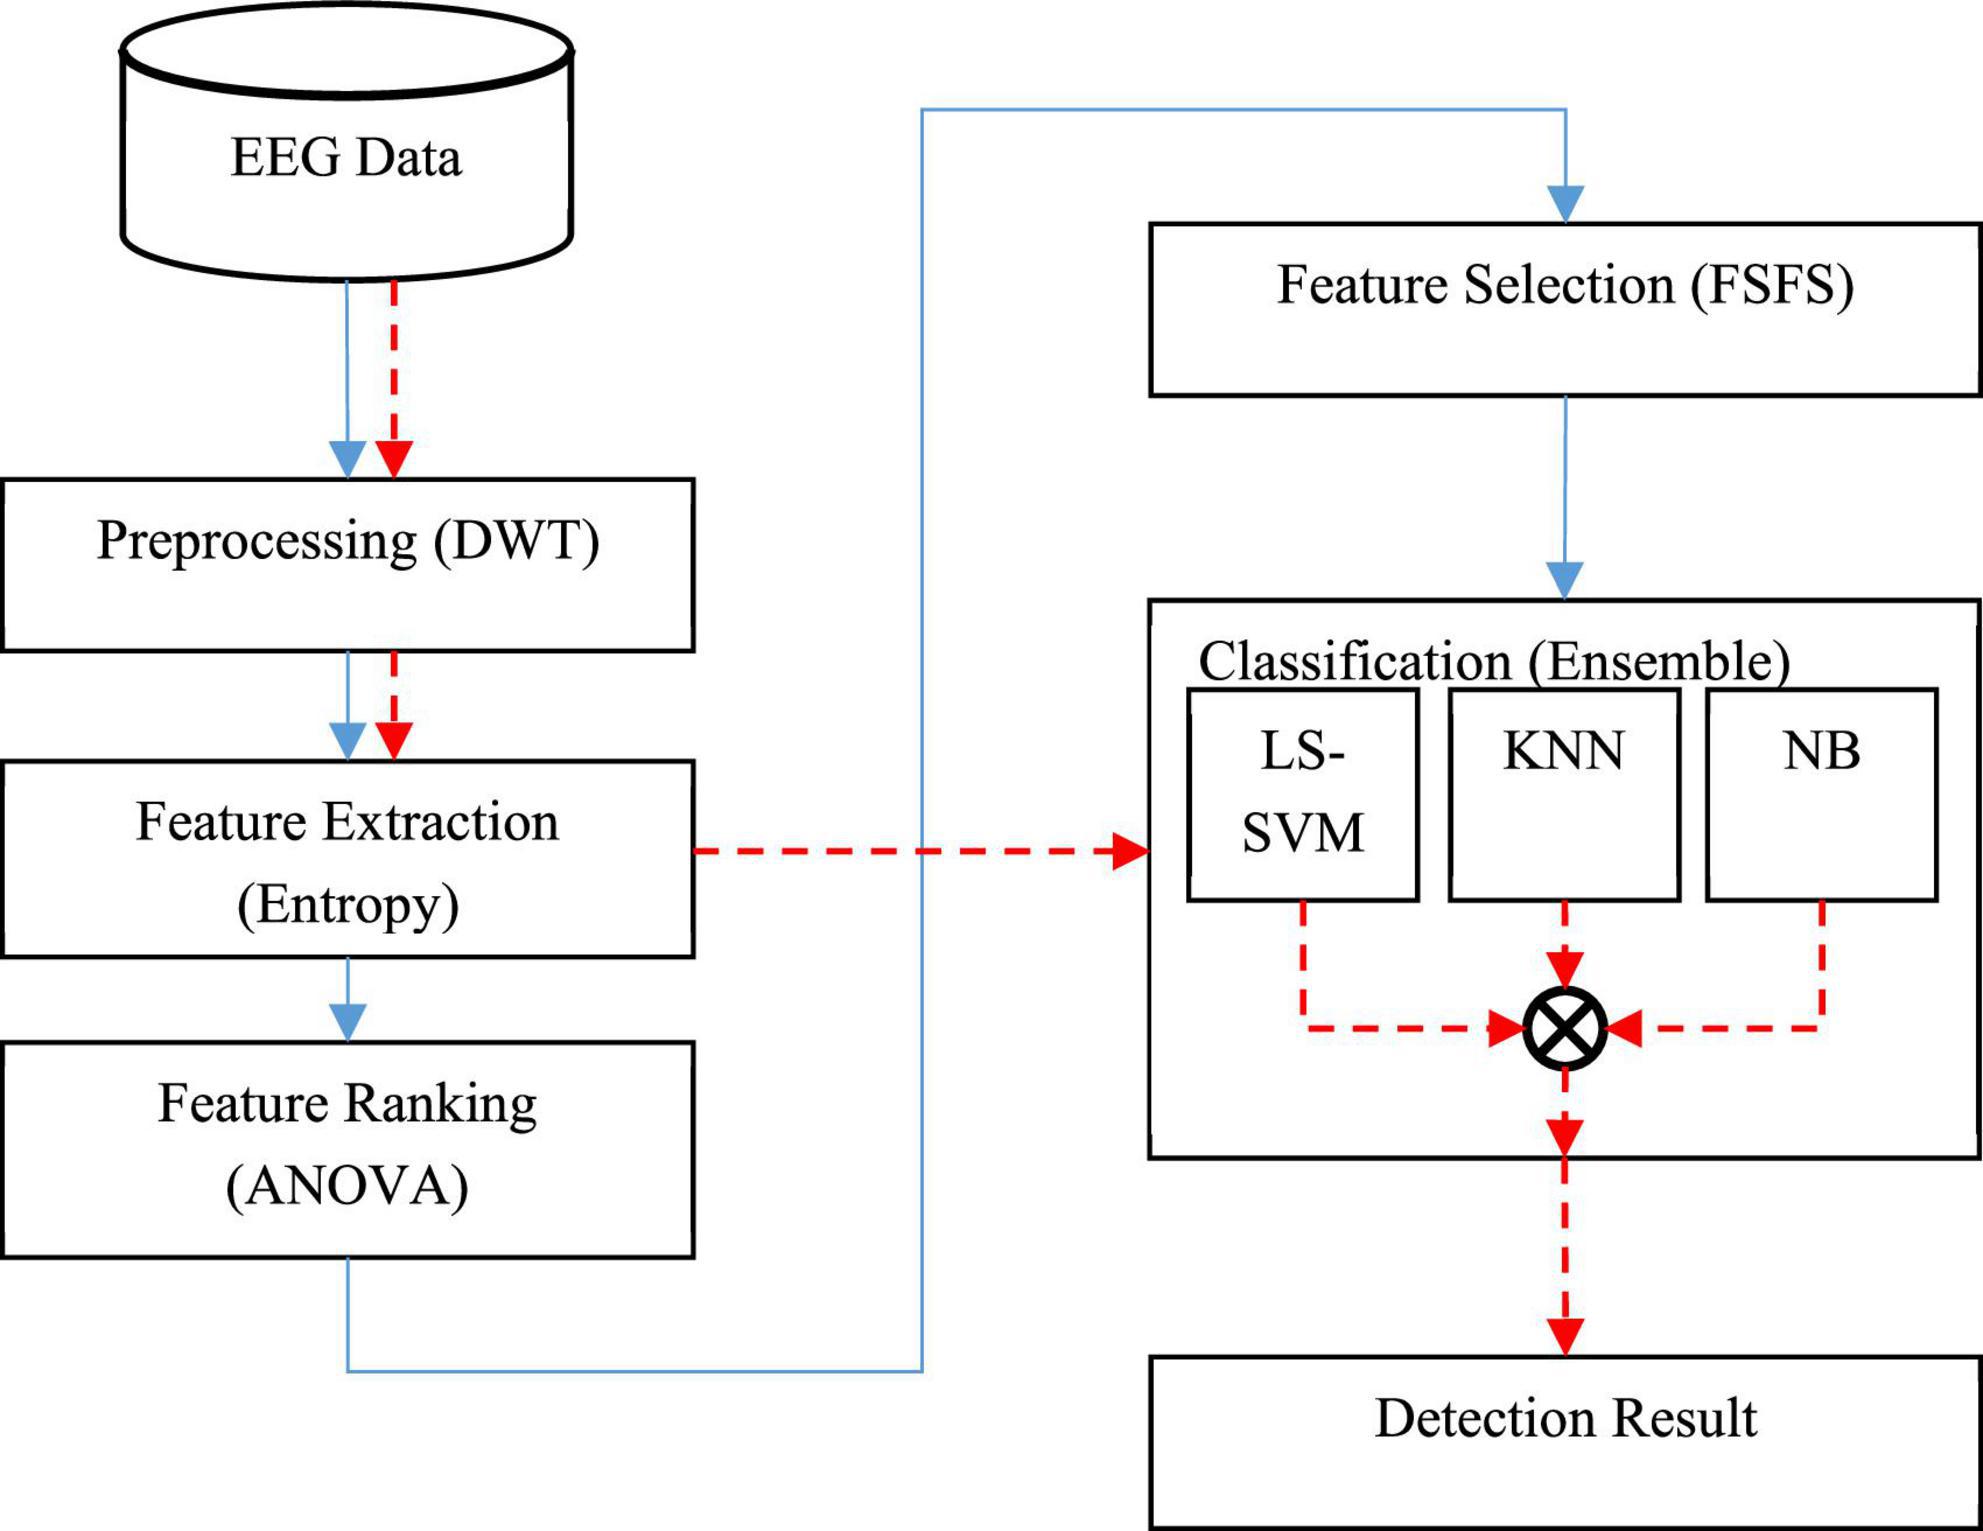 Detection of epileptic seizures through EEG signals using entropy features and ensemble learning